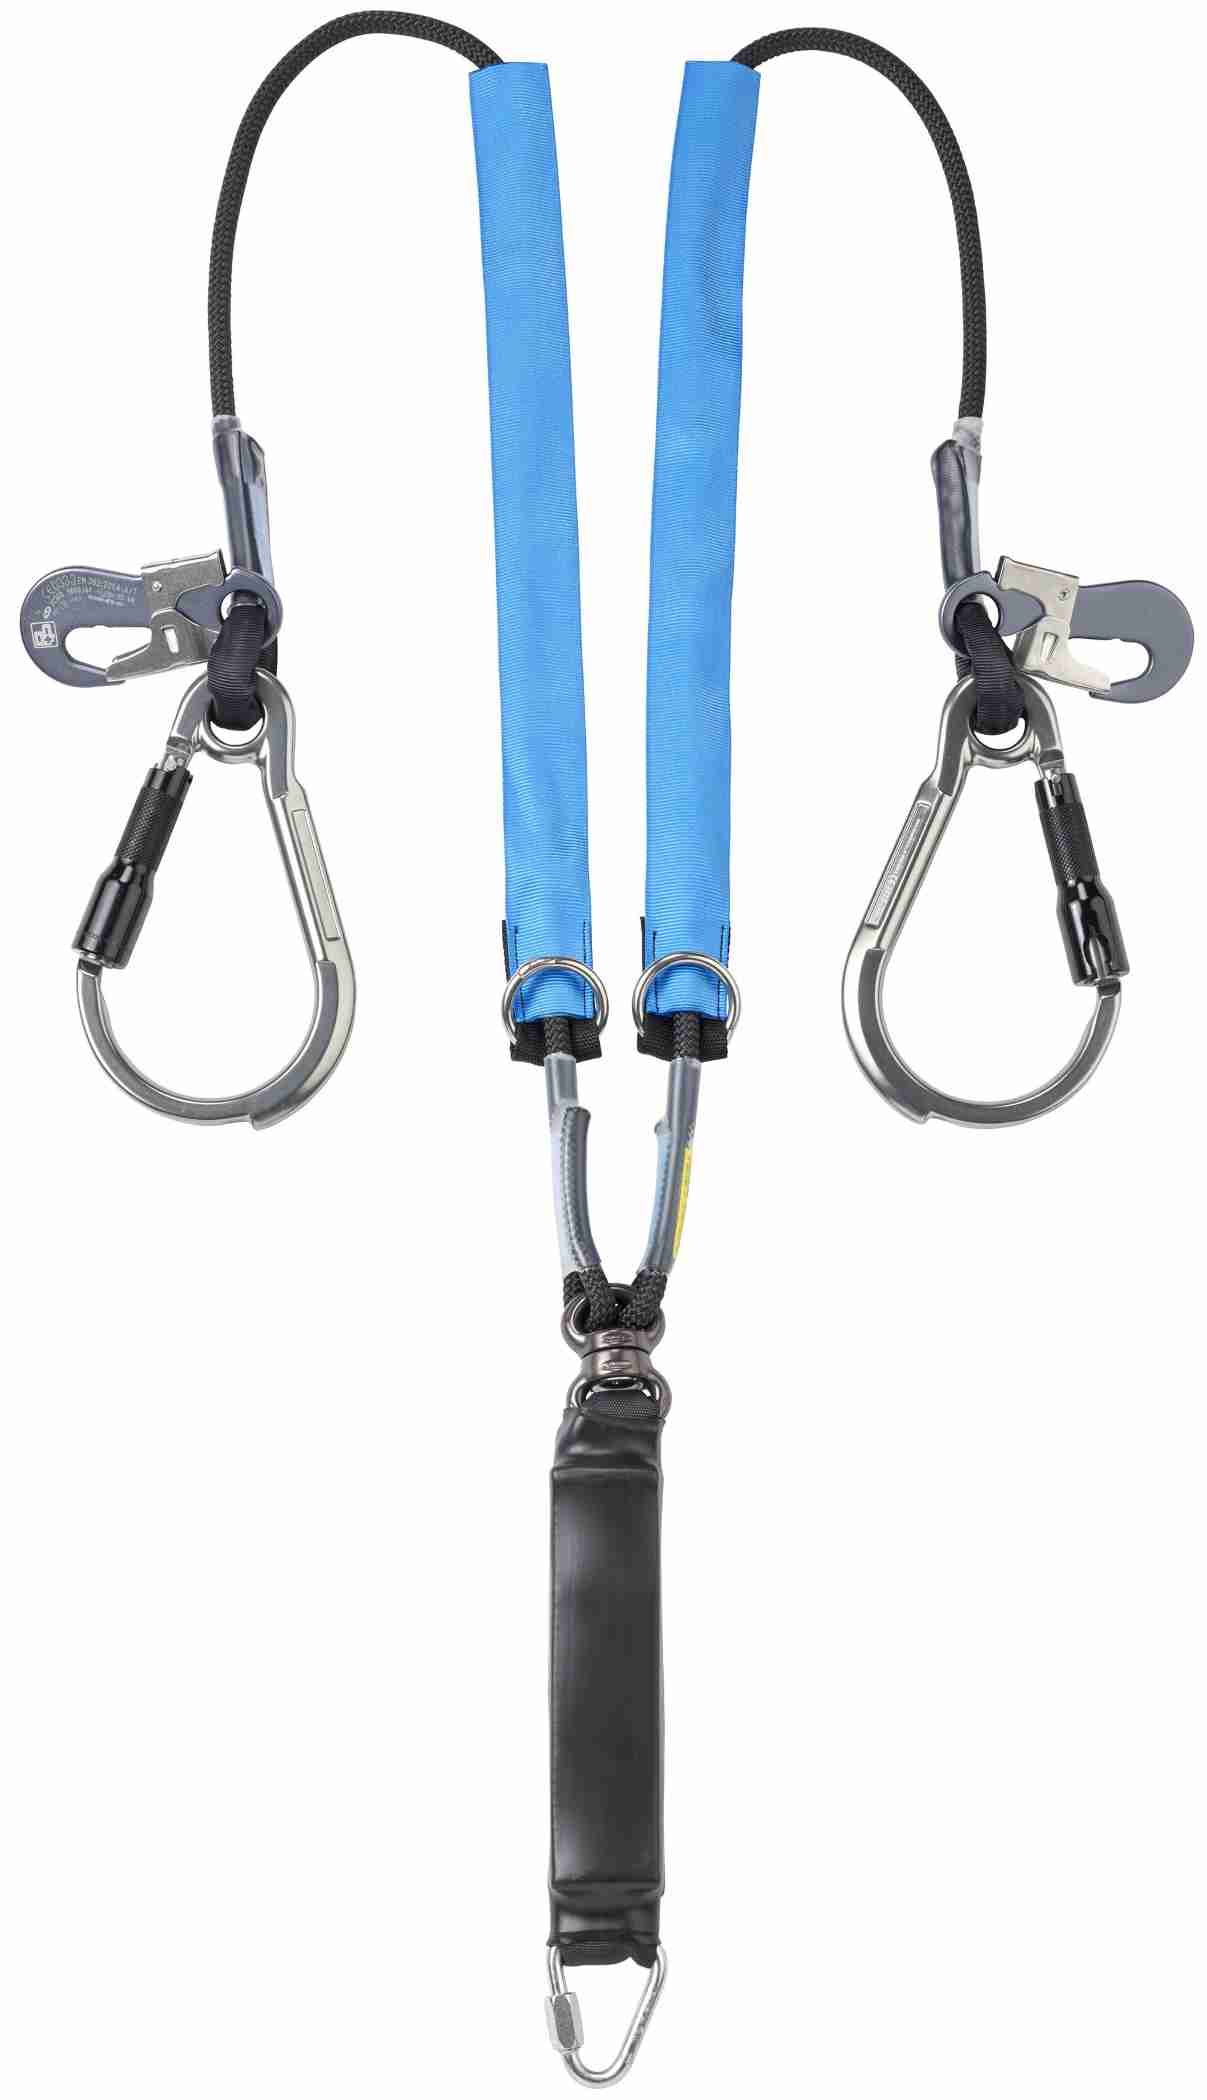 Fall Arrest Lanyards :: P&P Safety Limited :: The Best Quality 